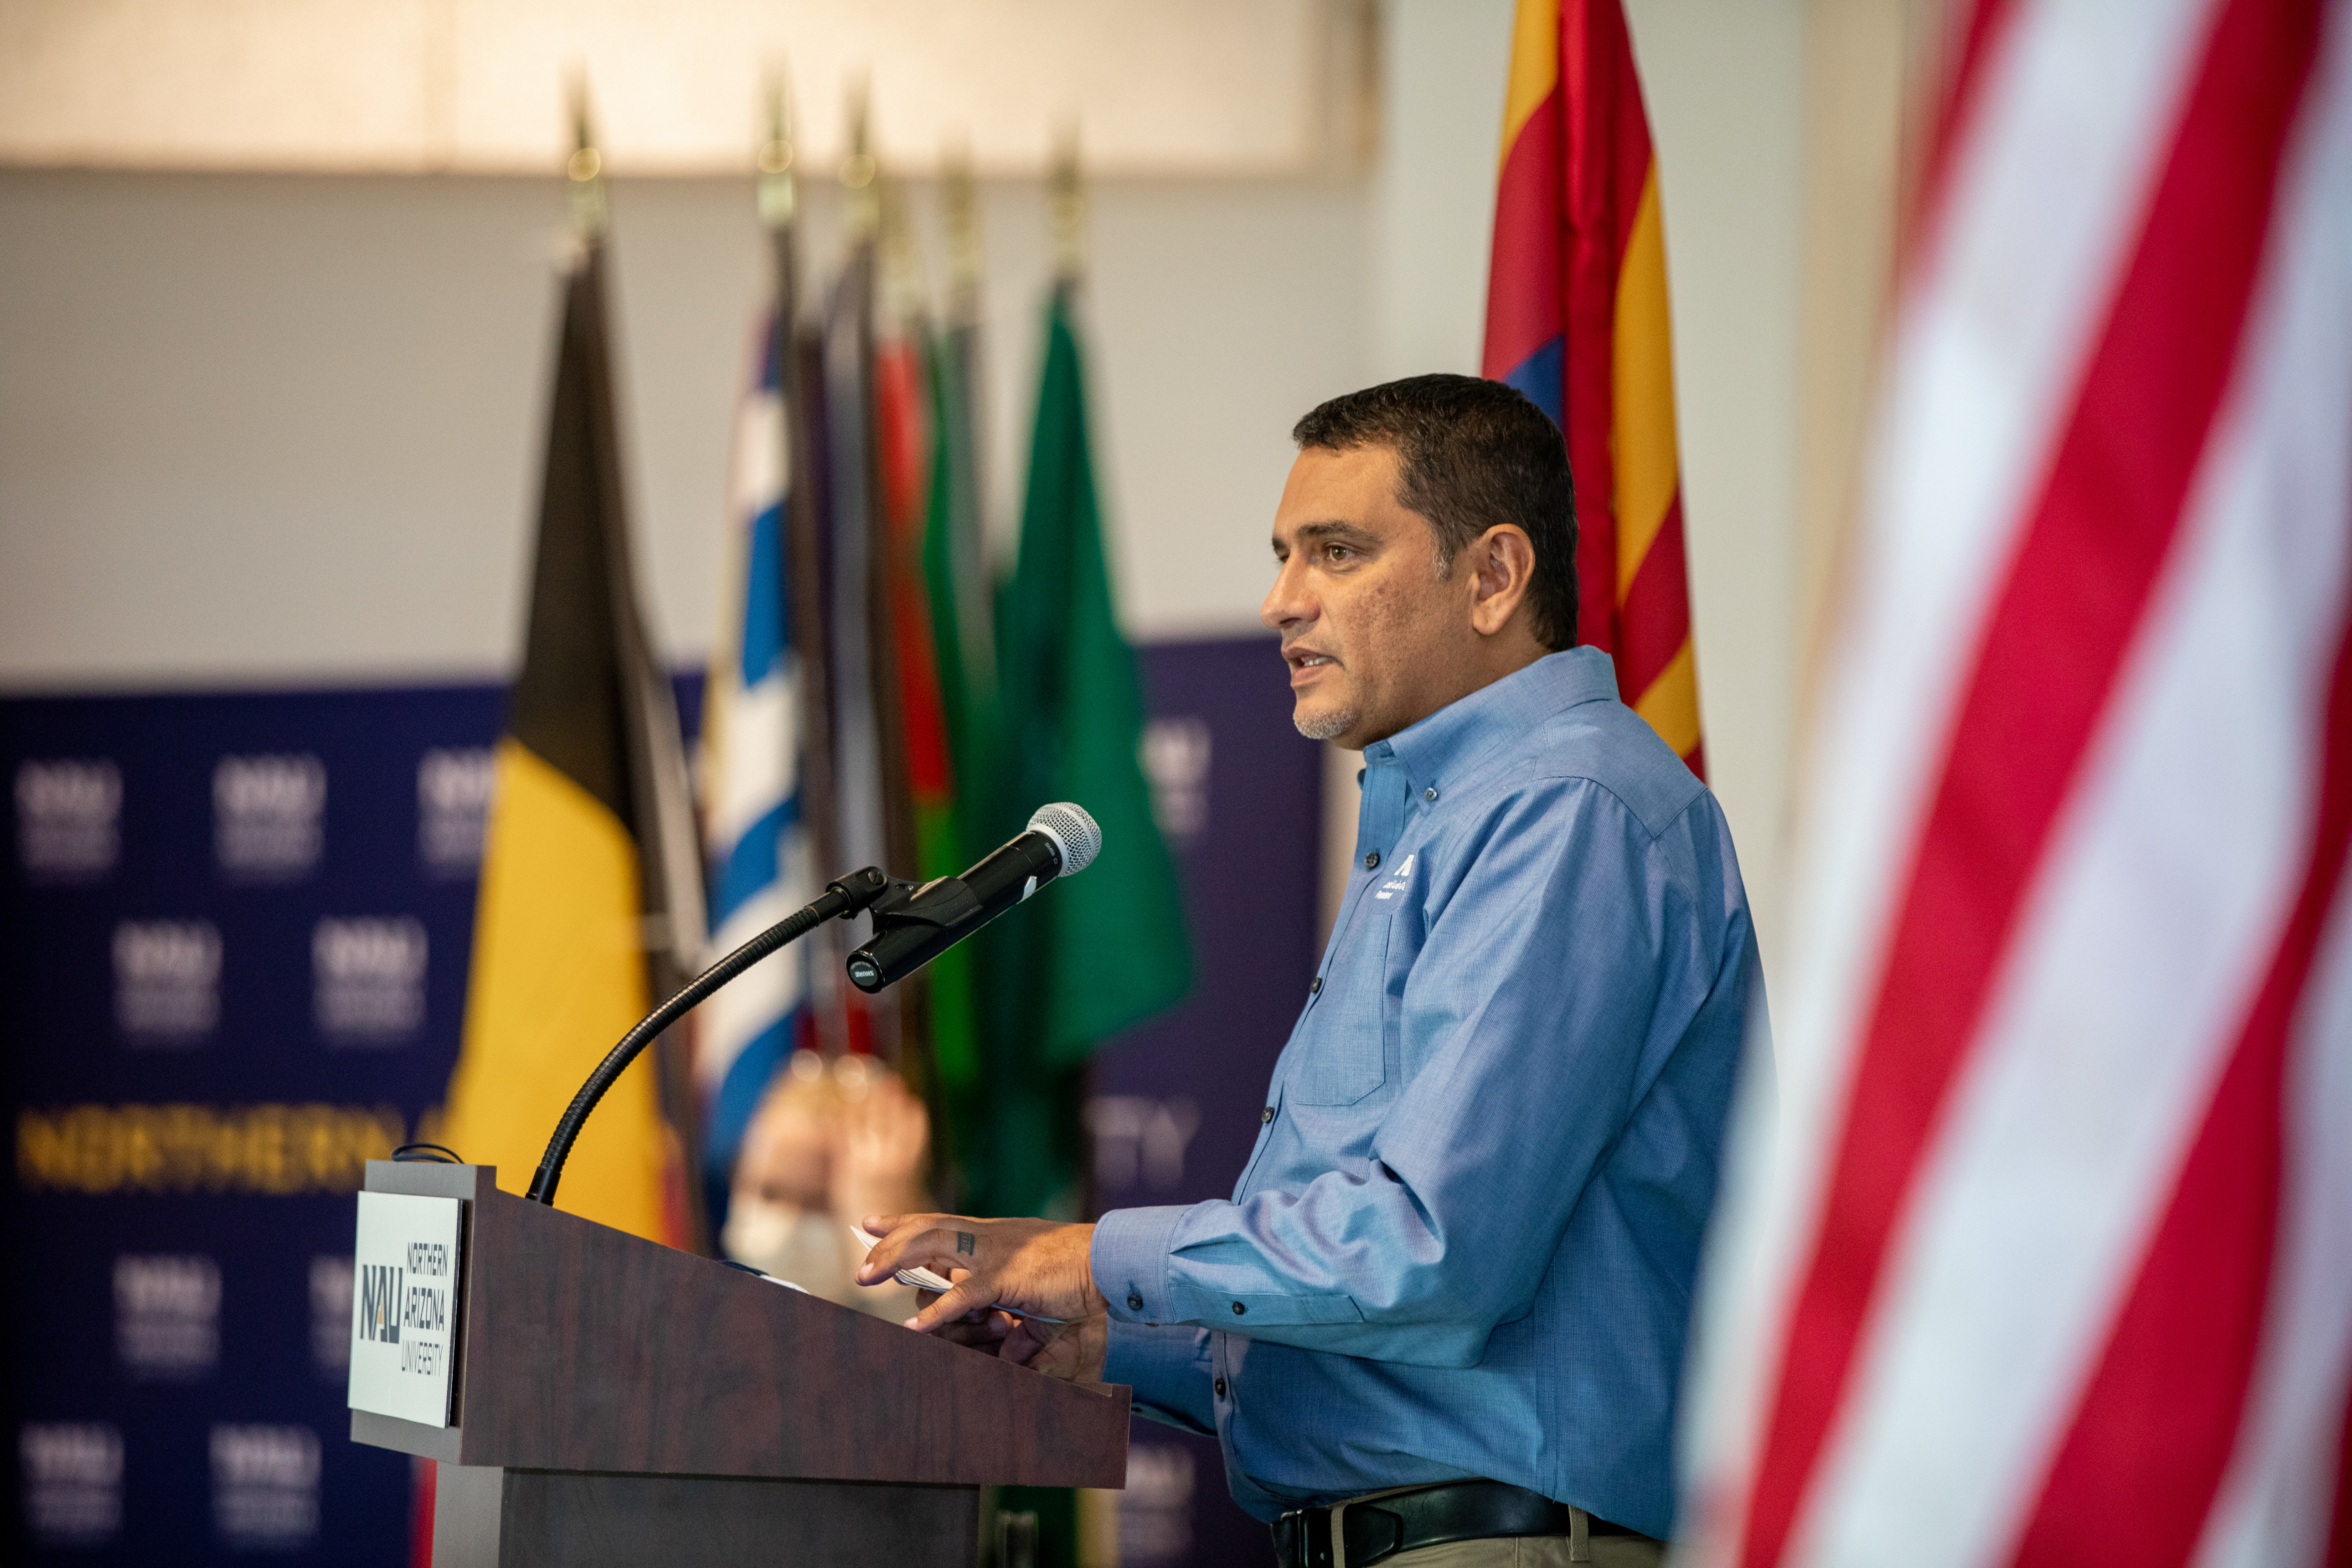 President Dr. Jose Luis Cruz Rivera speaks at a podium at the CIE grad celebration with a variety of countries' flags in the background.